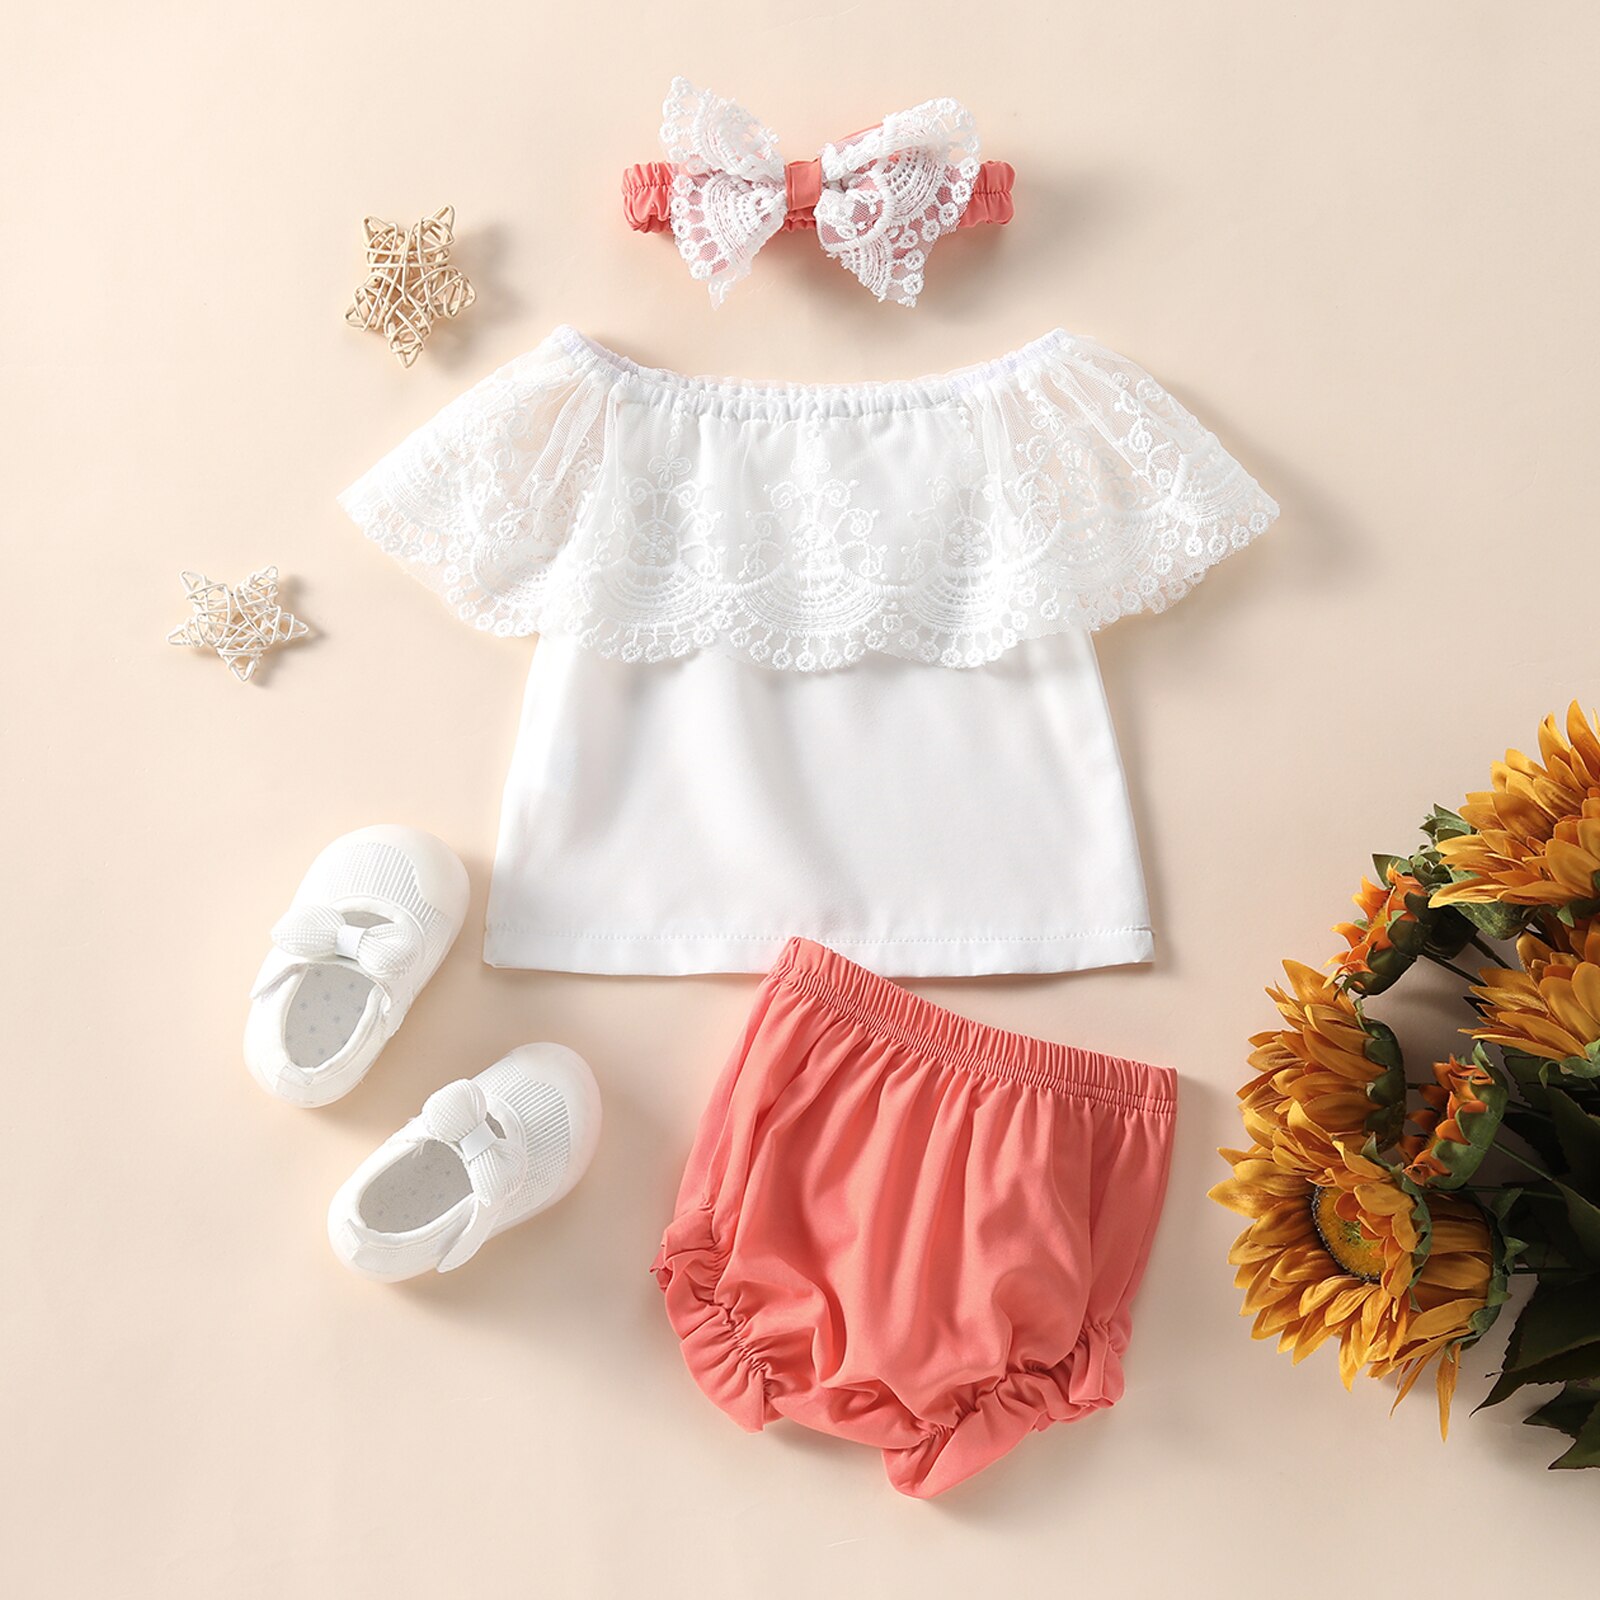 Cute-3Pcs-Toddler-Girls-Summer-Clothing-Outfit-Lace-Boat-Neck-Off-Shoulder-Tops-bow-knot-Shorts-1